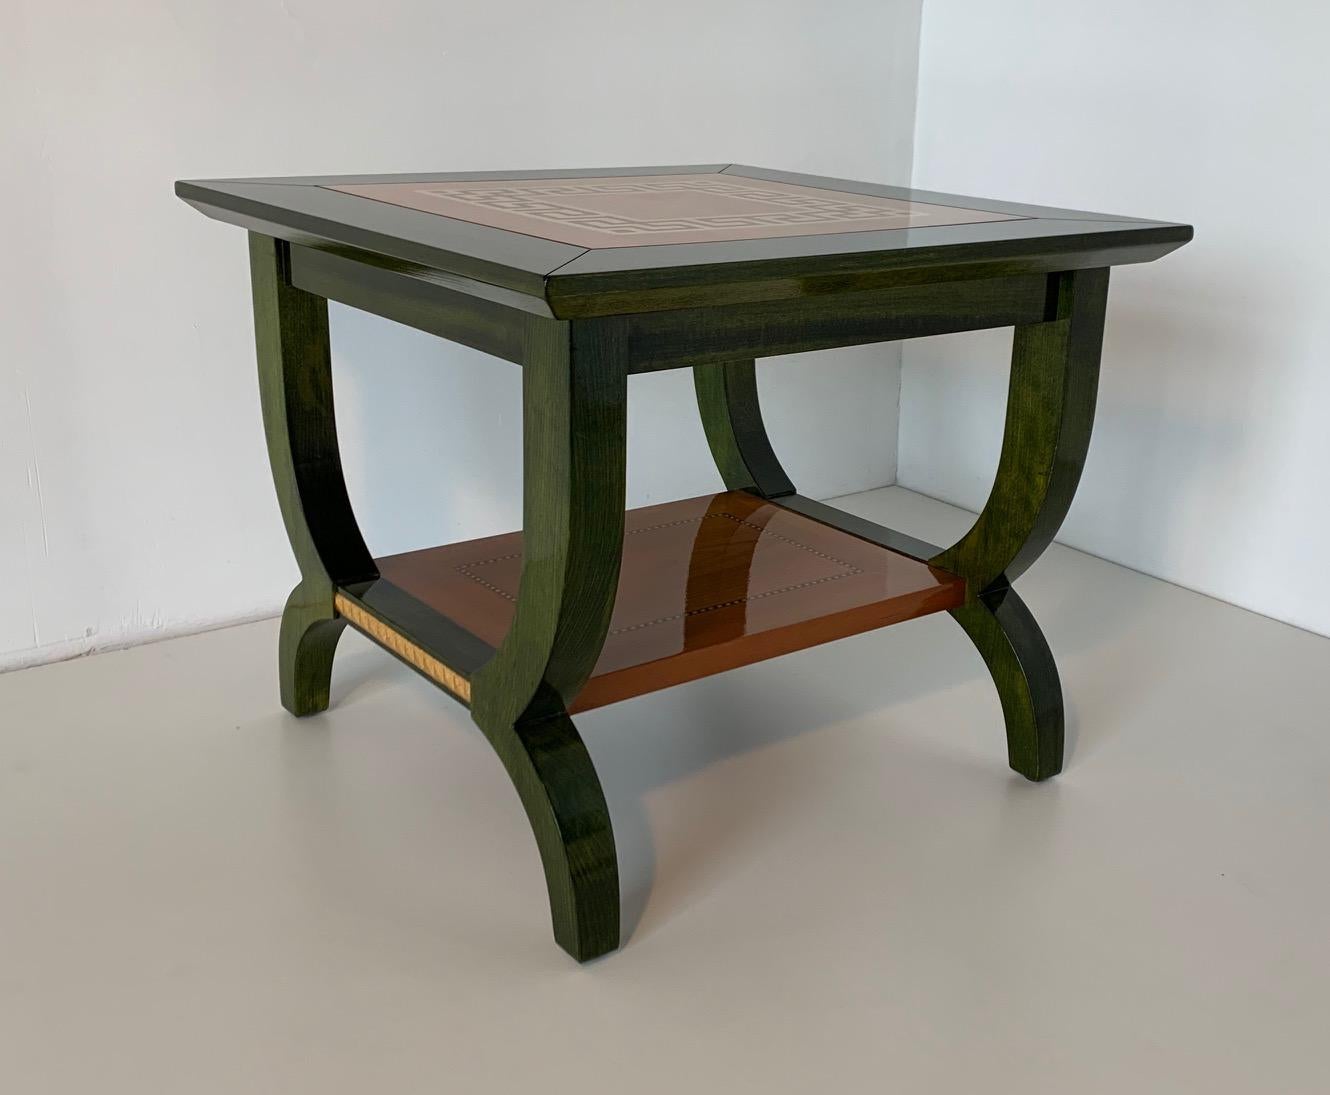 This coffee table was produced in Italy in the 1980s and it is in green aniline with a fine maple inlay reminiscent of the Greek Versace.
Decoration on the legs is in gold leaf.
Completely restored.